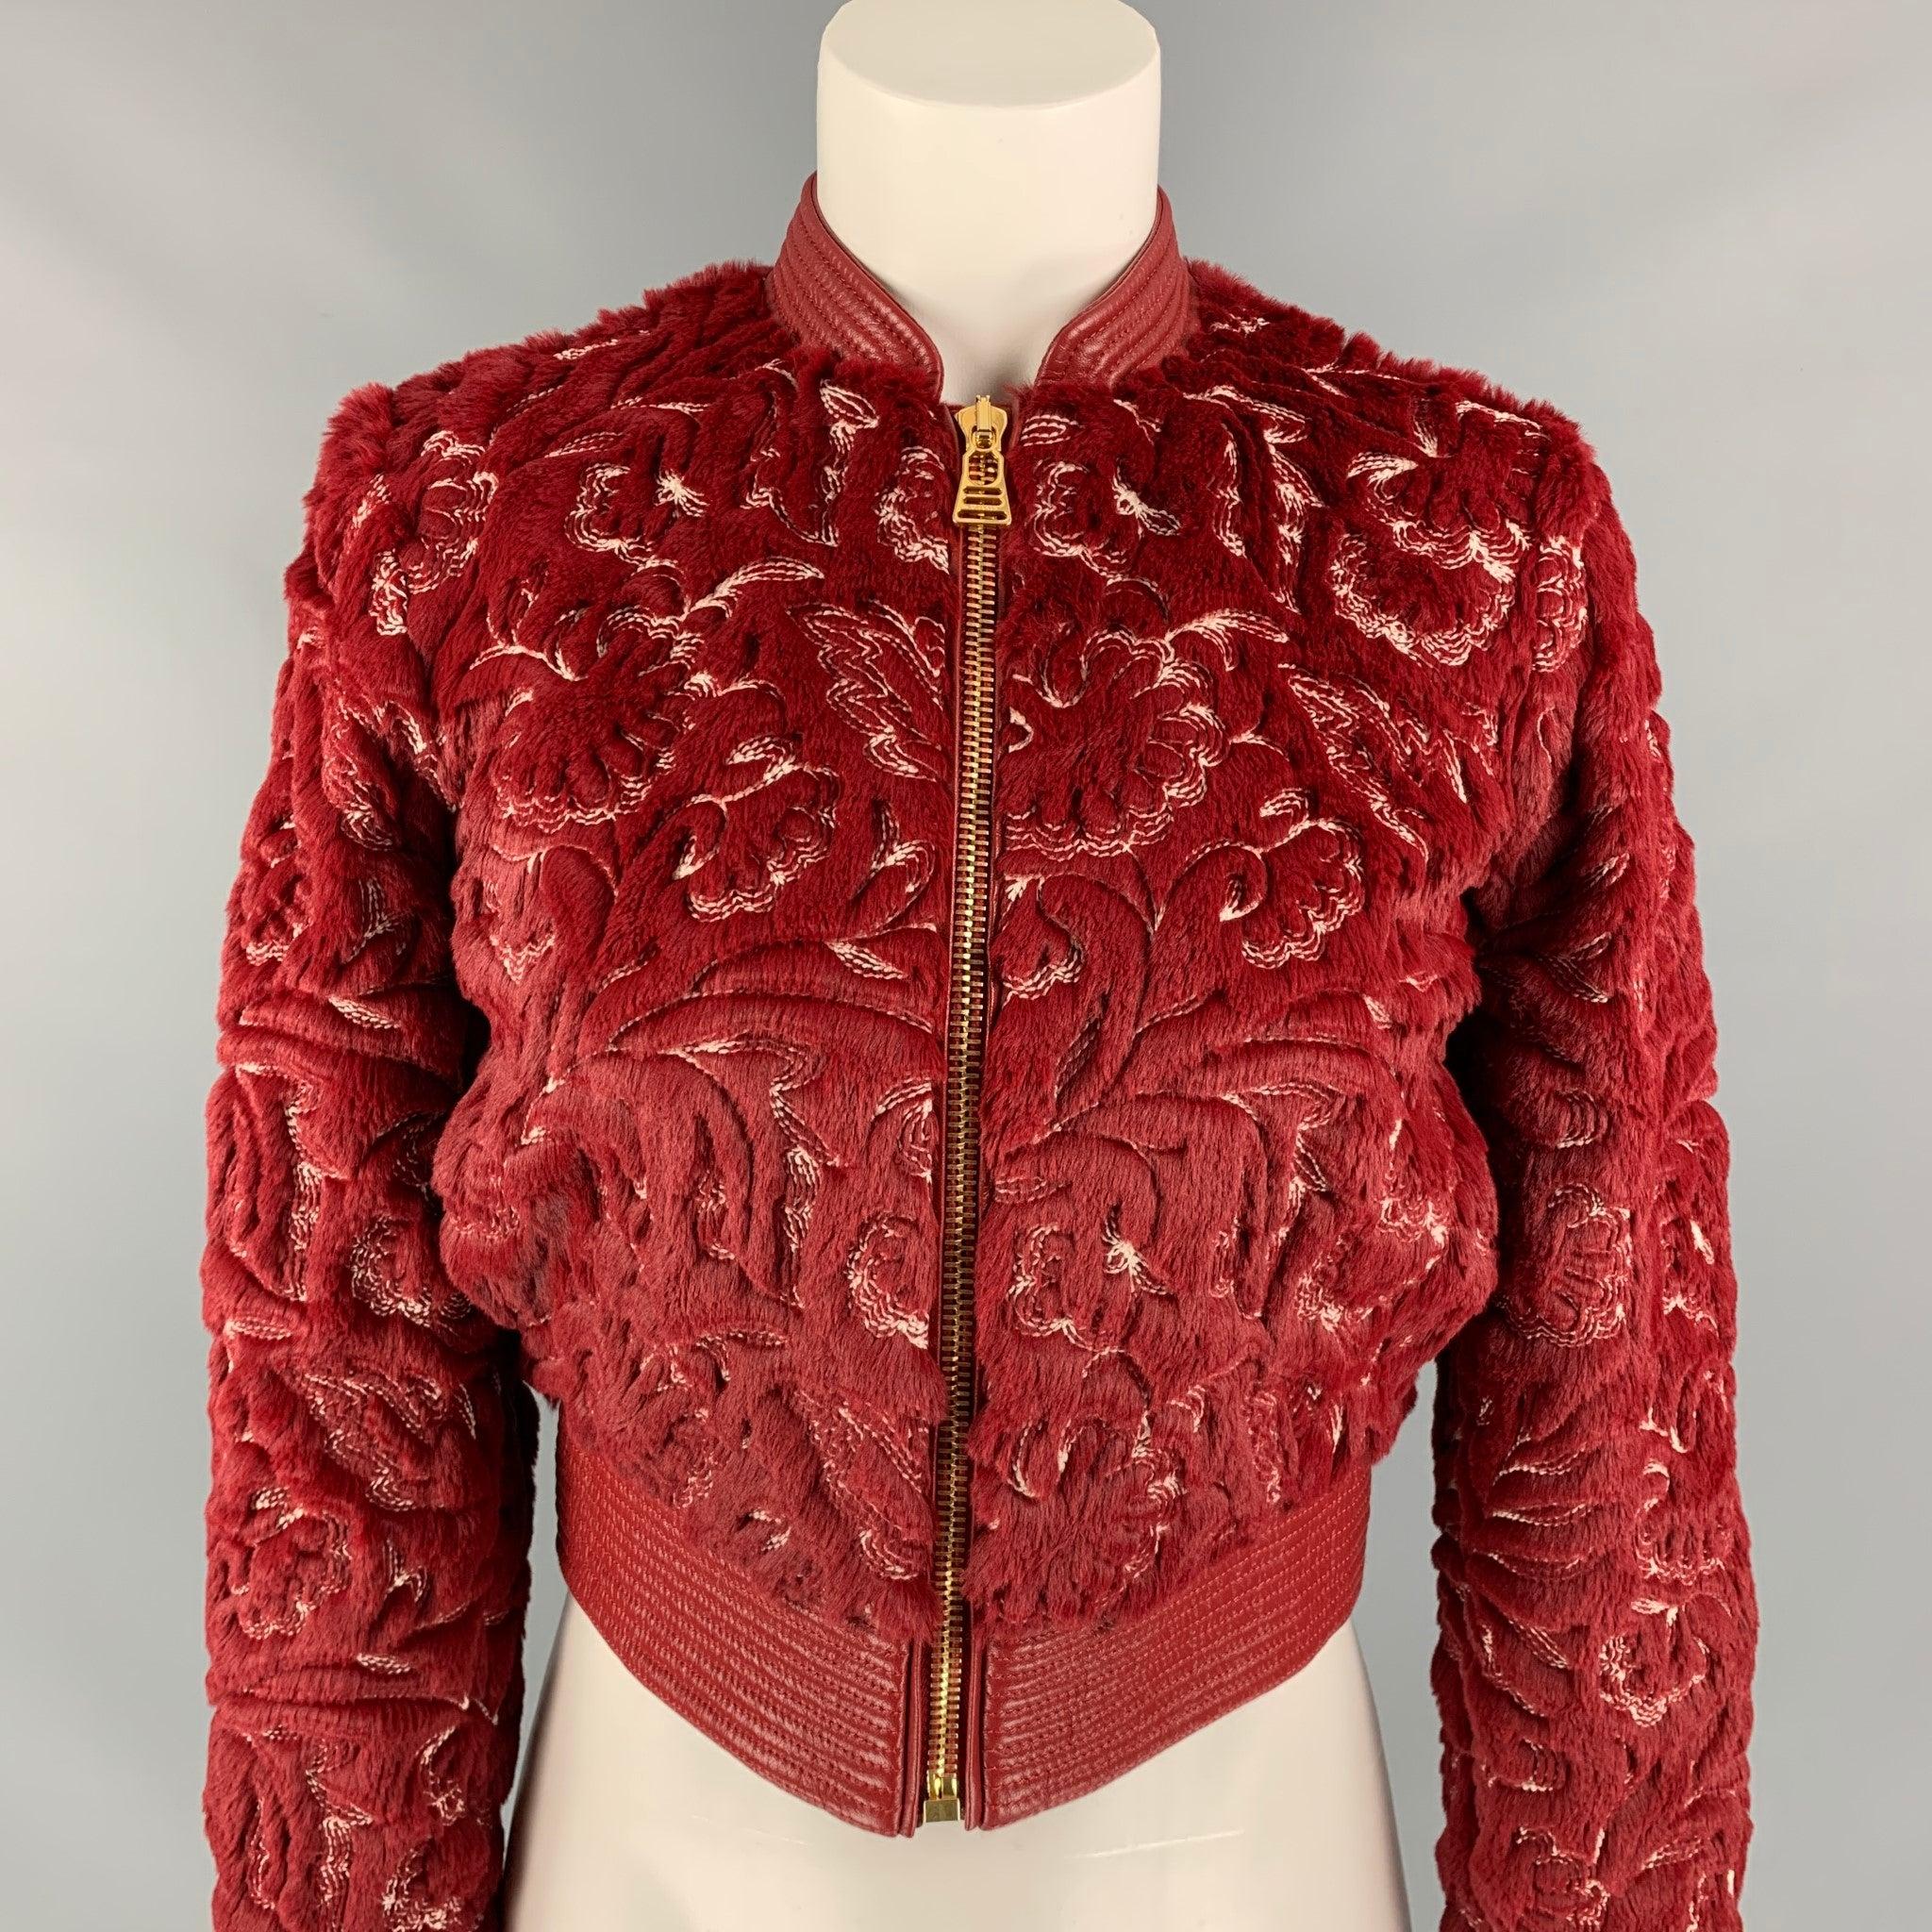 LA PERLA jacket comes in a red & white faux fur polyester / cotton with a full liner featuring a bomber style, leather trim, embroidered details throughout, slit pockets, and a gold toe zip up closure.
New With Tags.
 

Marked:   IT 36 / FR 32/ DE